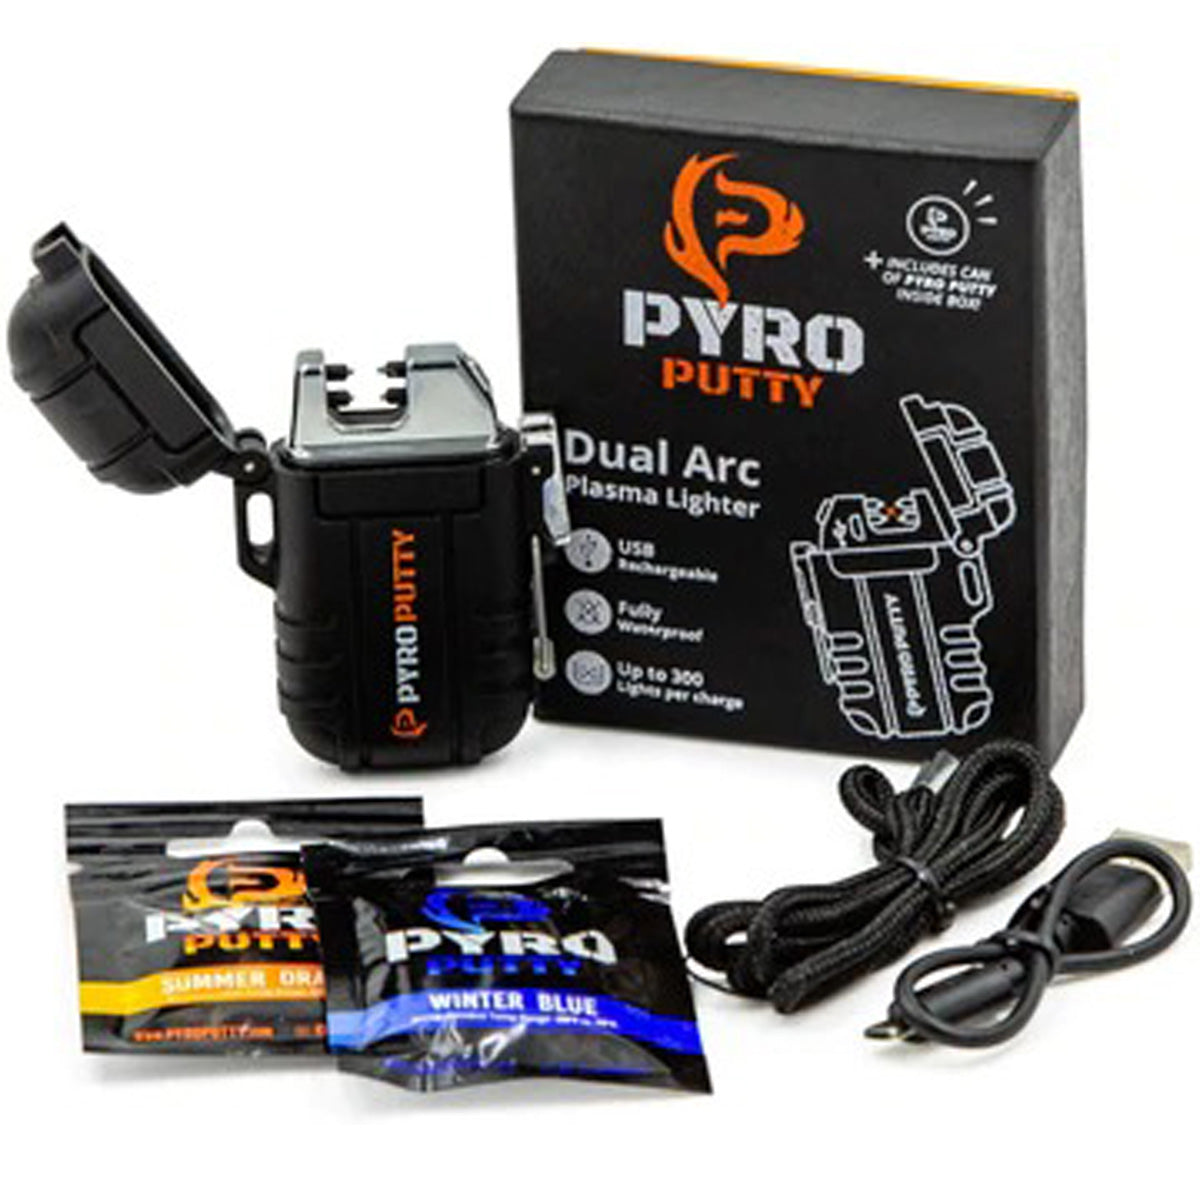 Pyro Putty Dual Arch Rechargeable Lighter